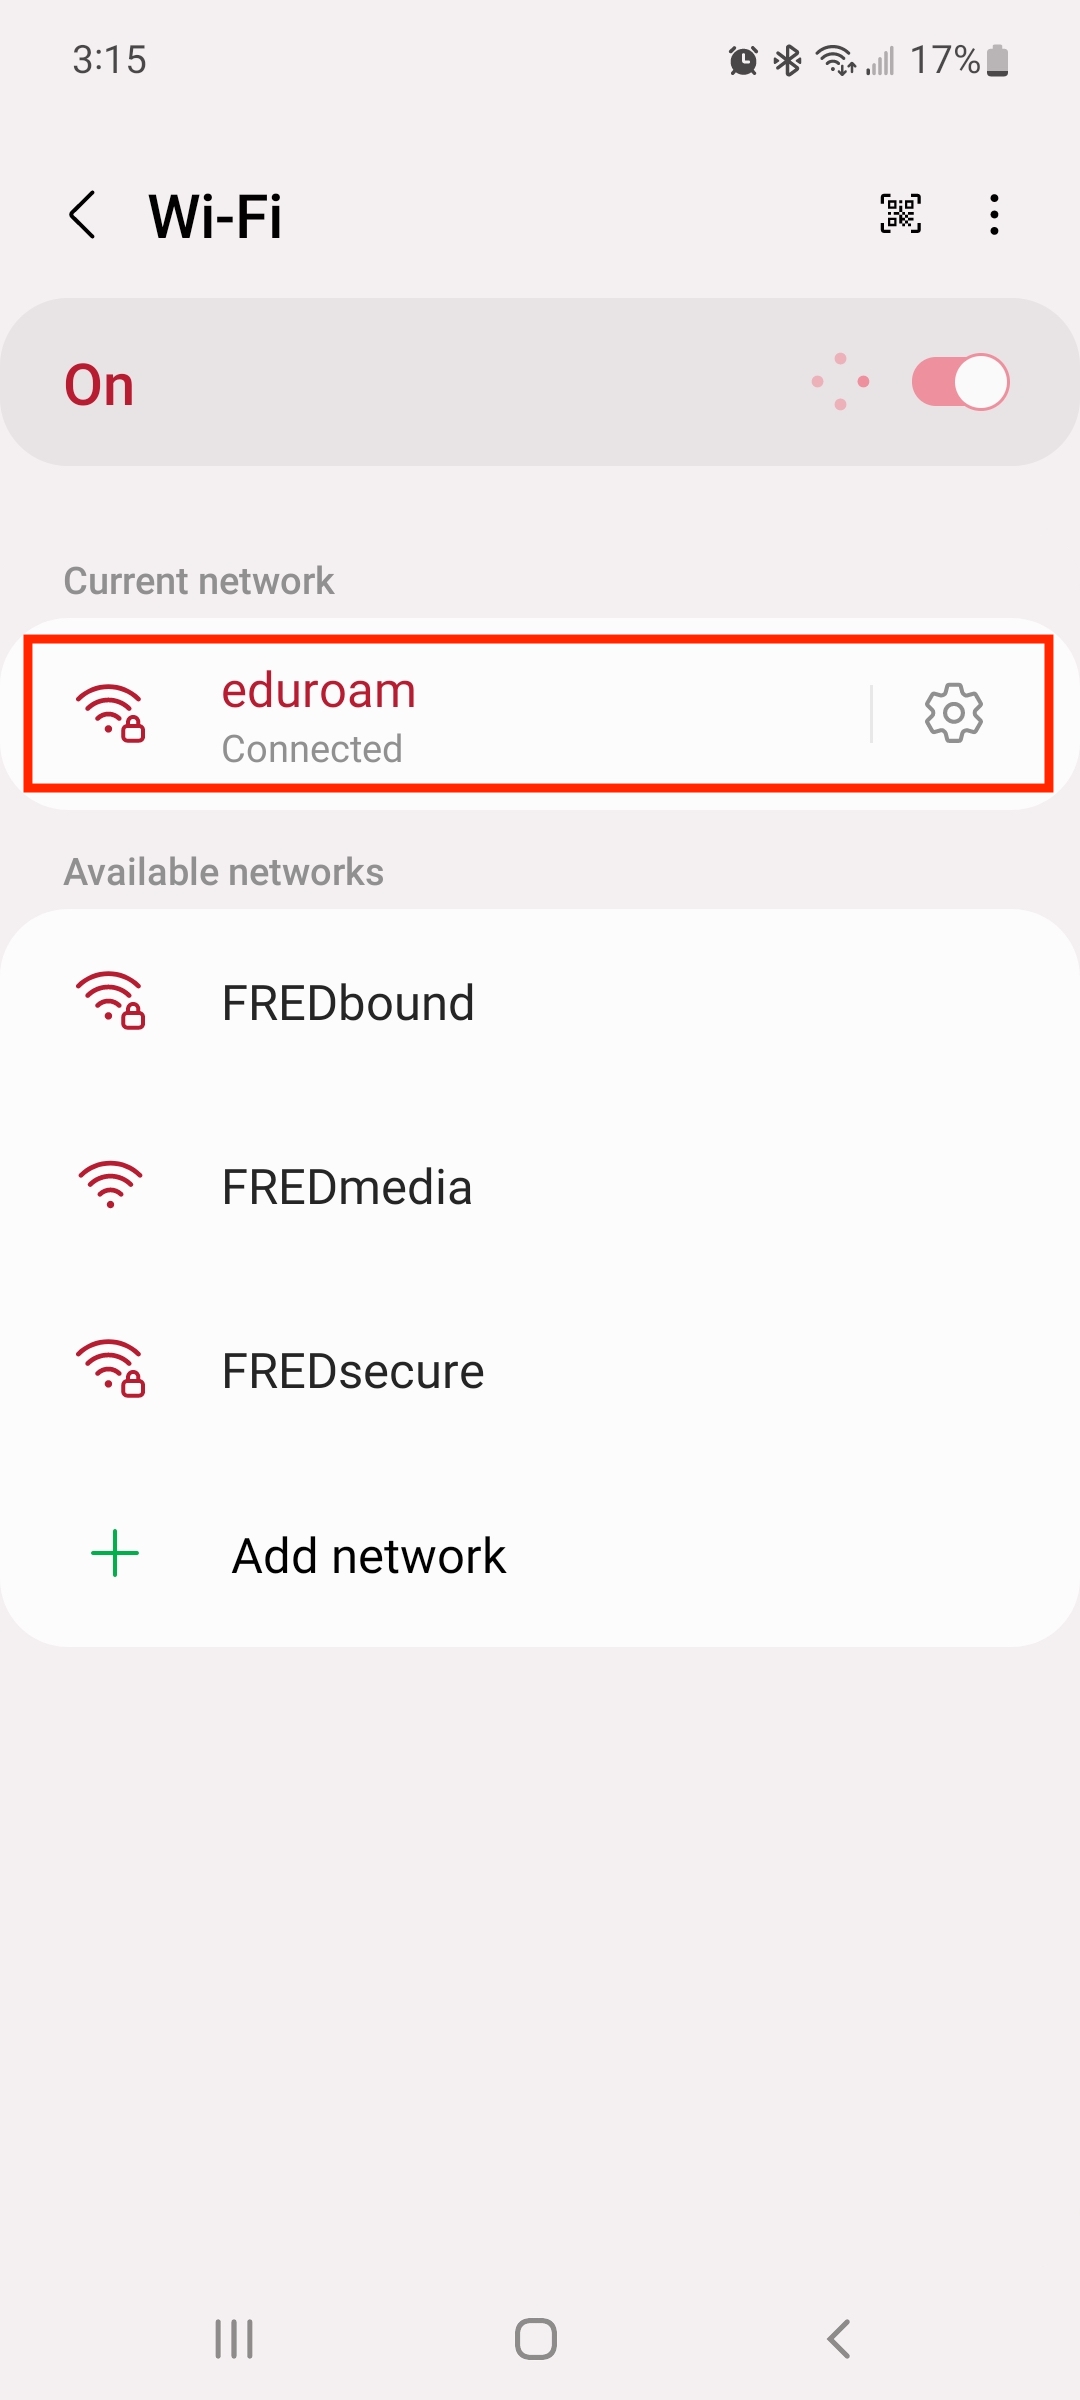 The Wi-Fi menu on an Android device showing eduroam as the connected network